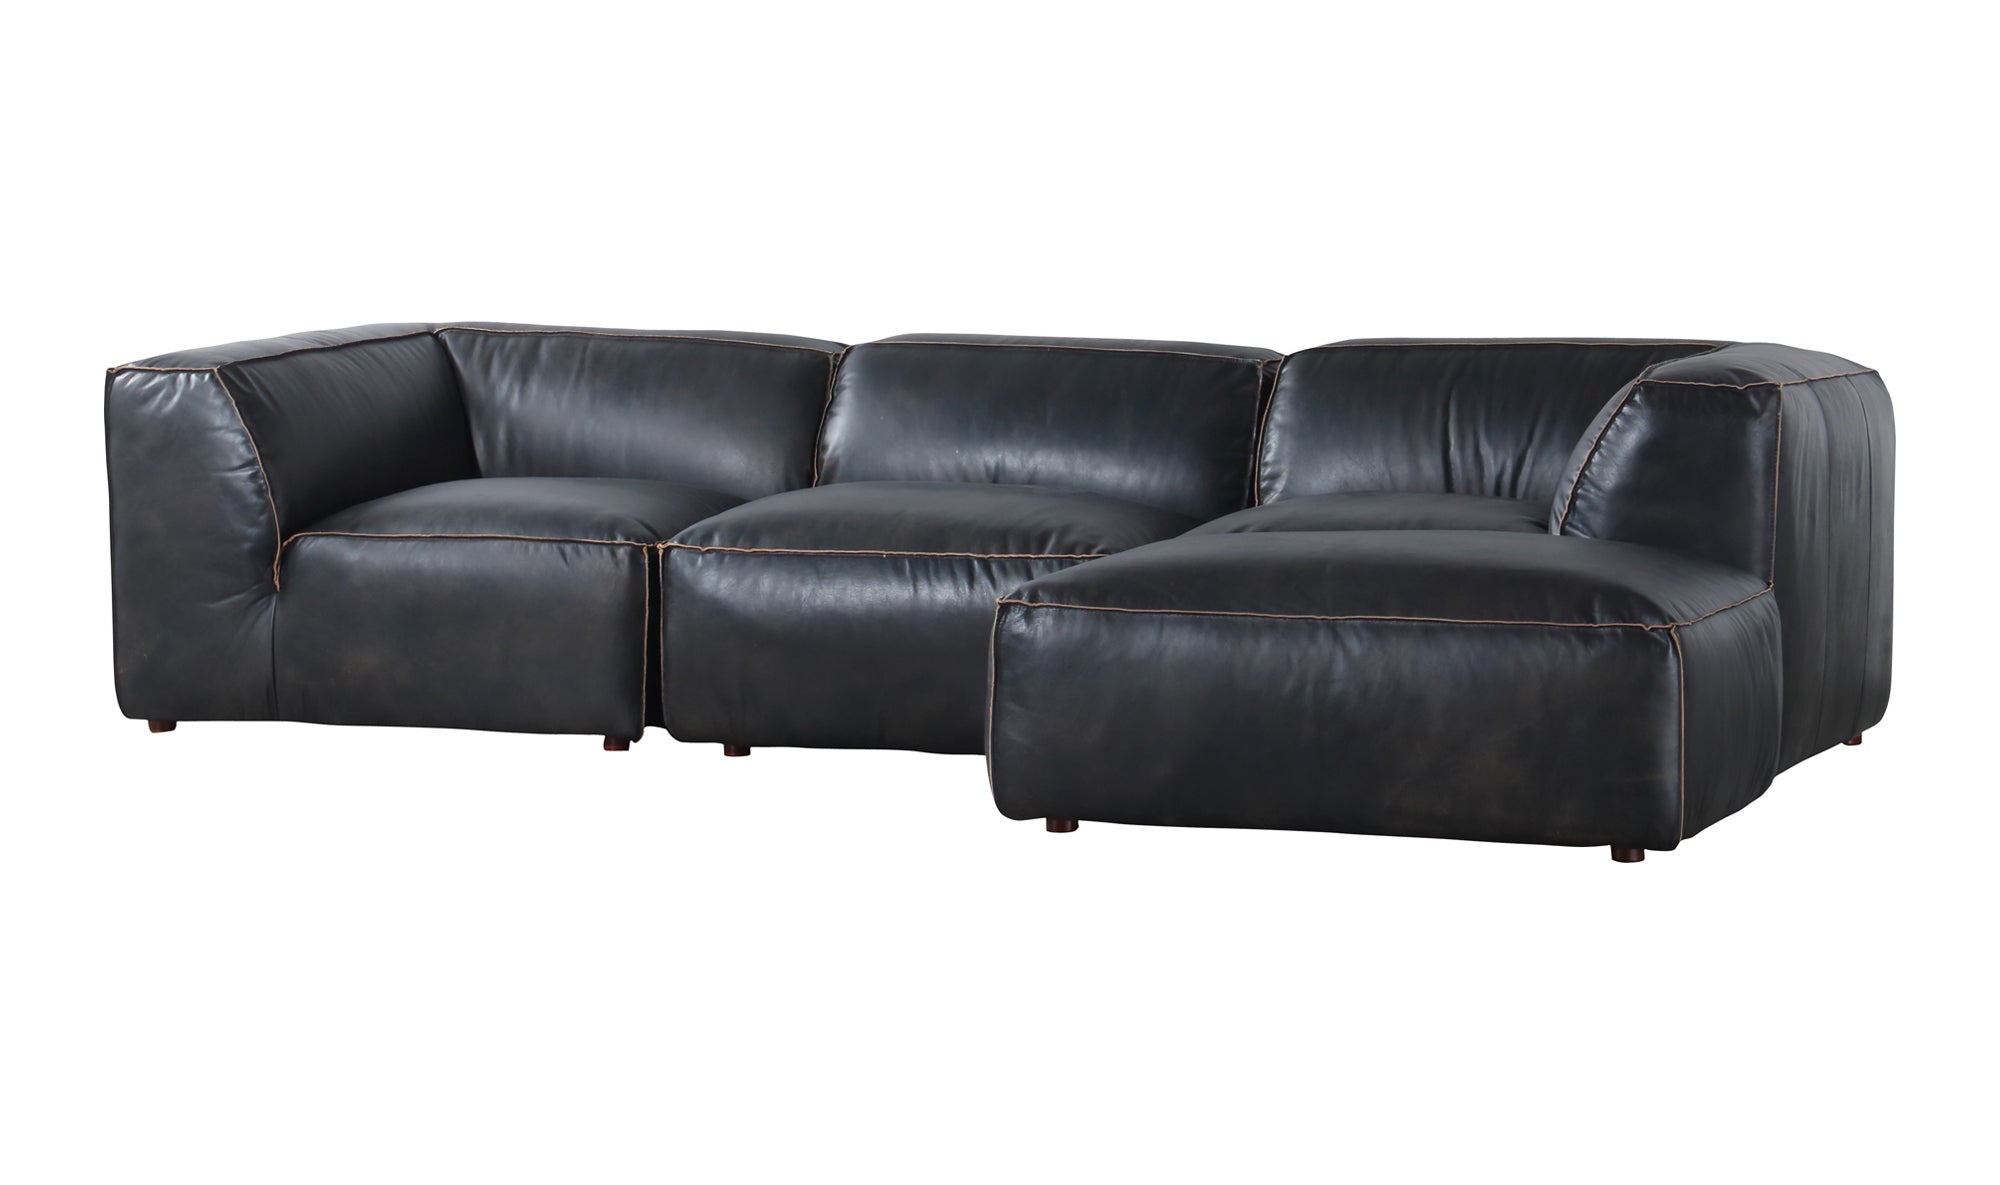 Luxe Lounge Modular Sectional - Antique